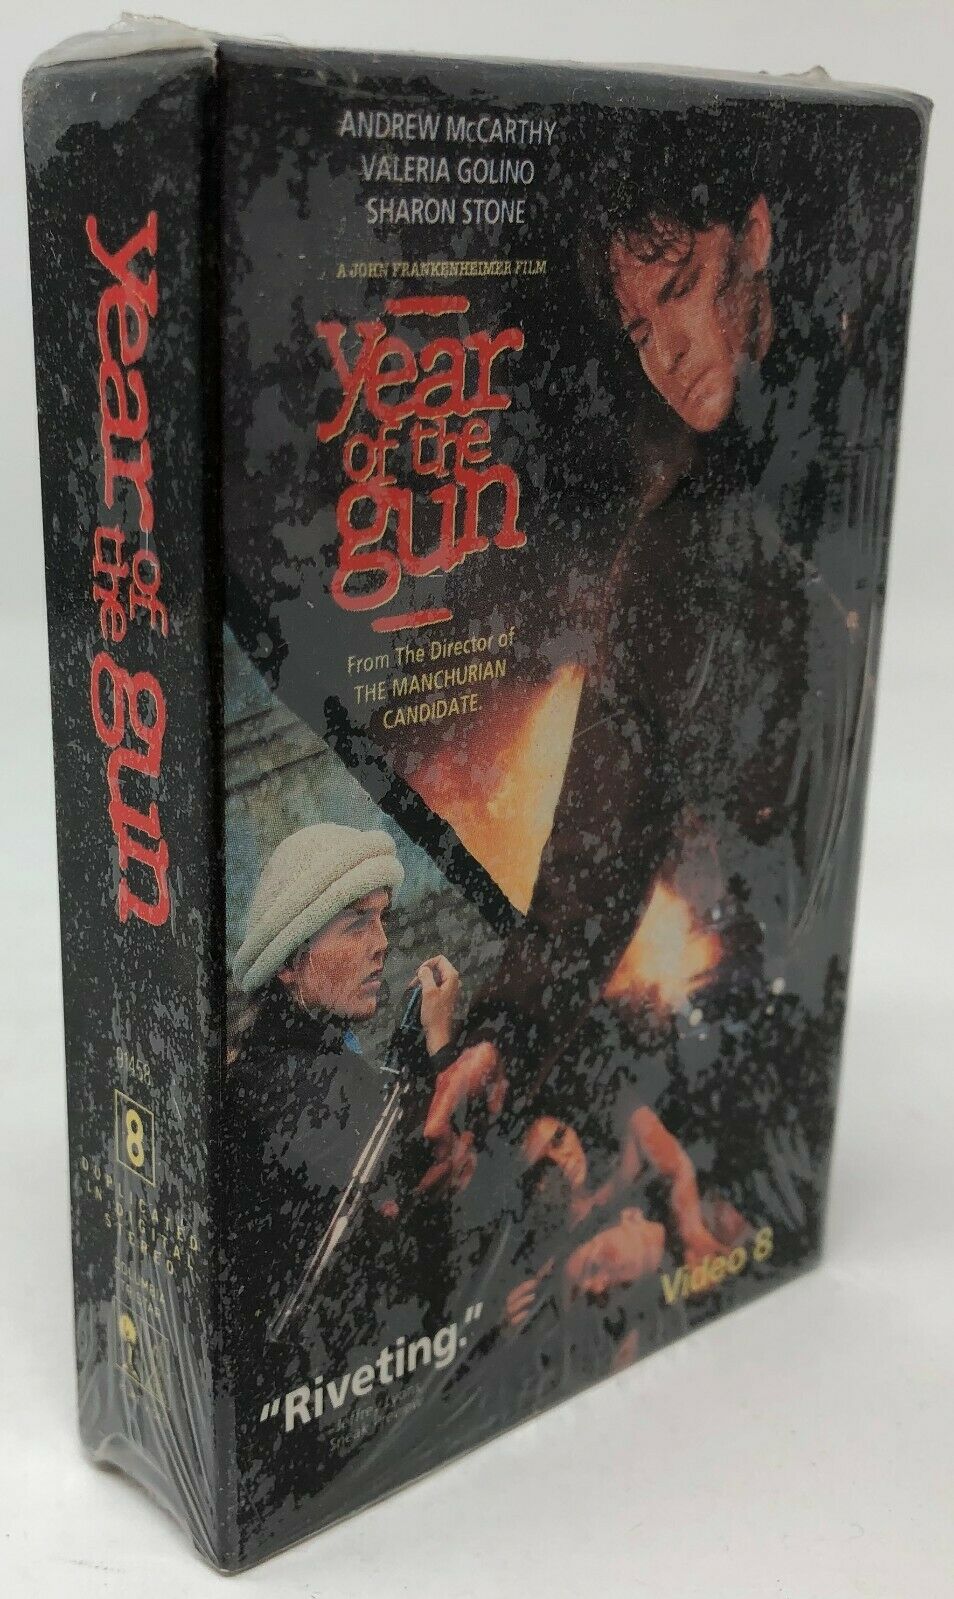 New Sealed Year Of The Gun Video 8 Movie 8mm Andrew Mccarthy